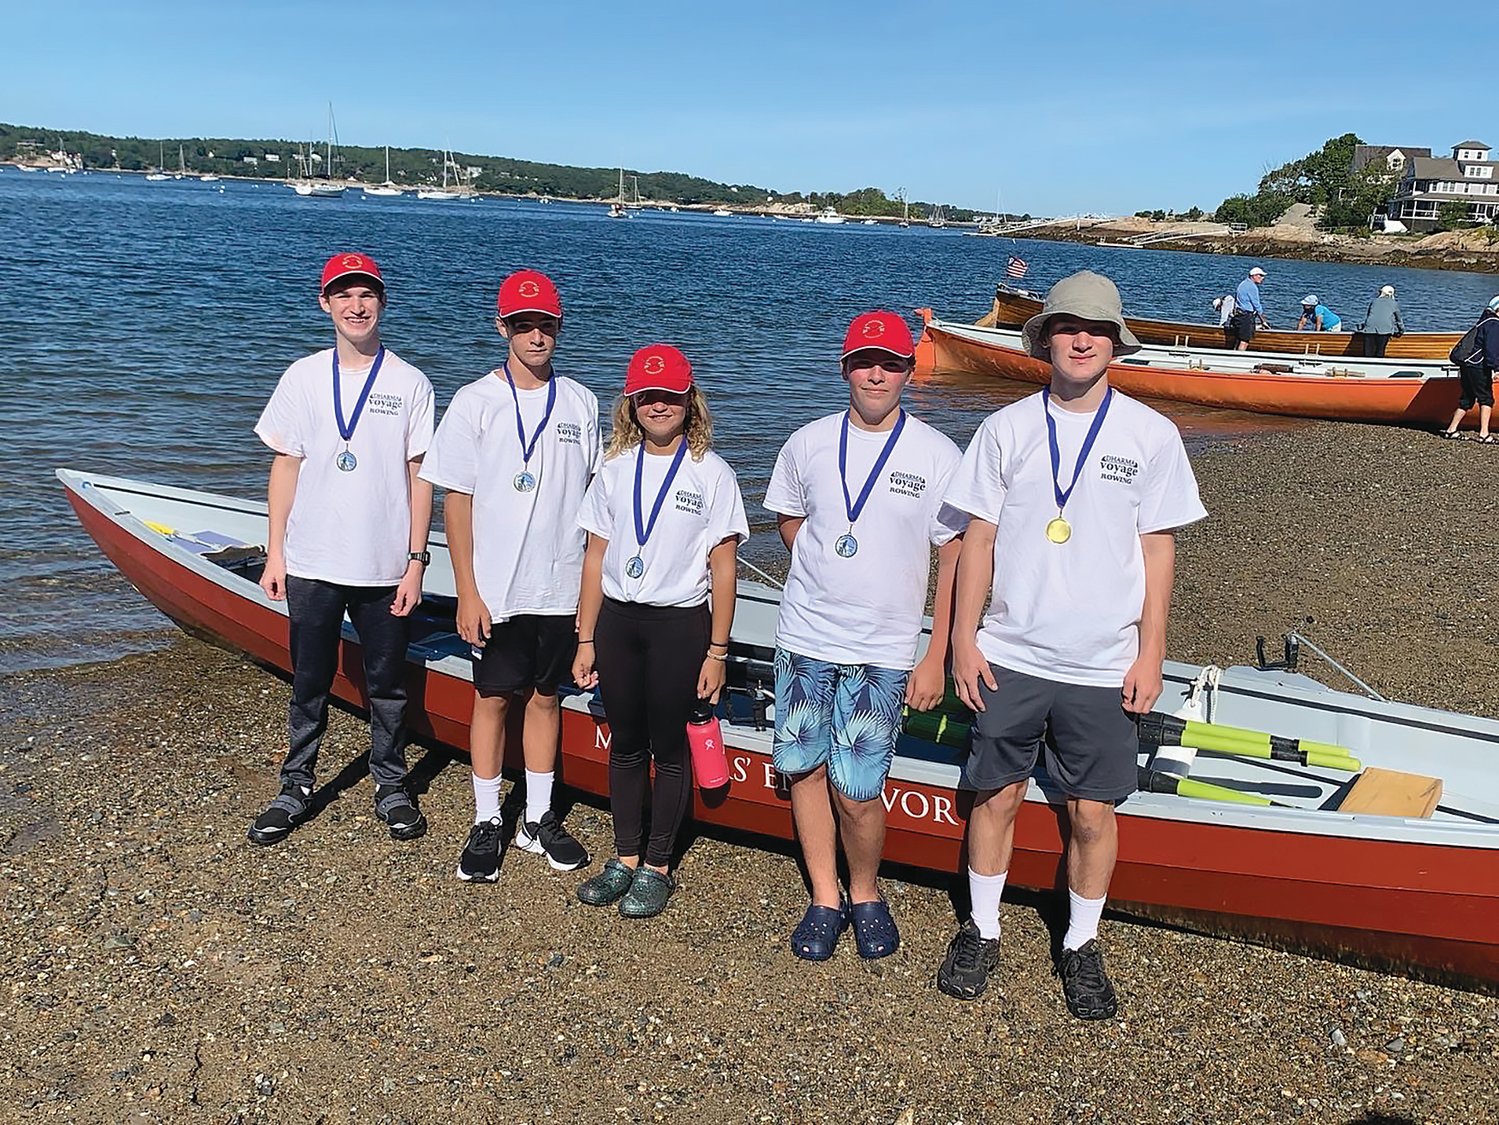 From left, Ethan Stewart, 11 (coxswain), Sam Hall, 13 (stroke), Aja Crockett, 11, Ryder Jusseaume, 14, and Blake Stewart, 13, pose for a photo during Saturday's competition on Gloucester Harbor.